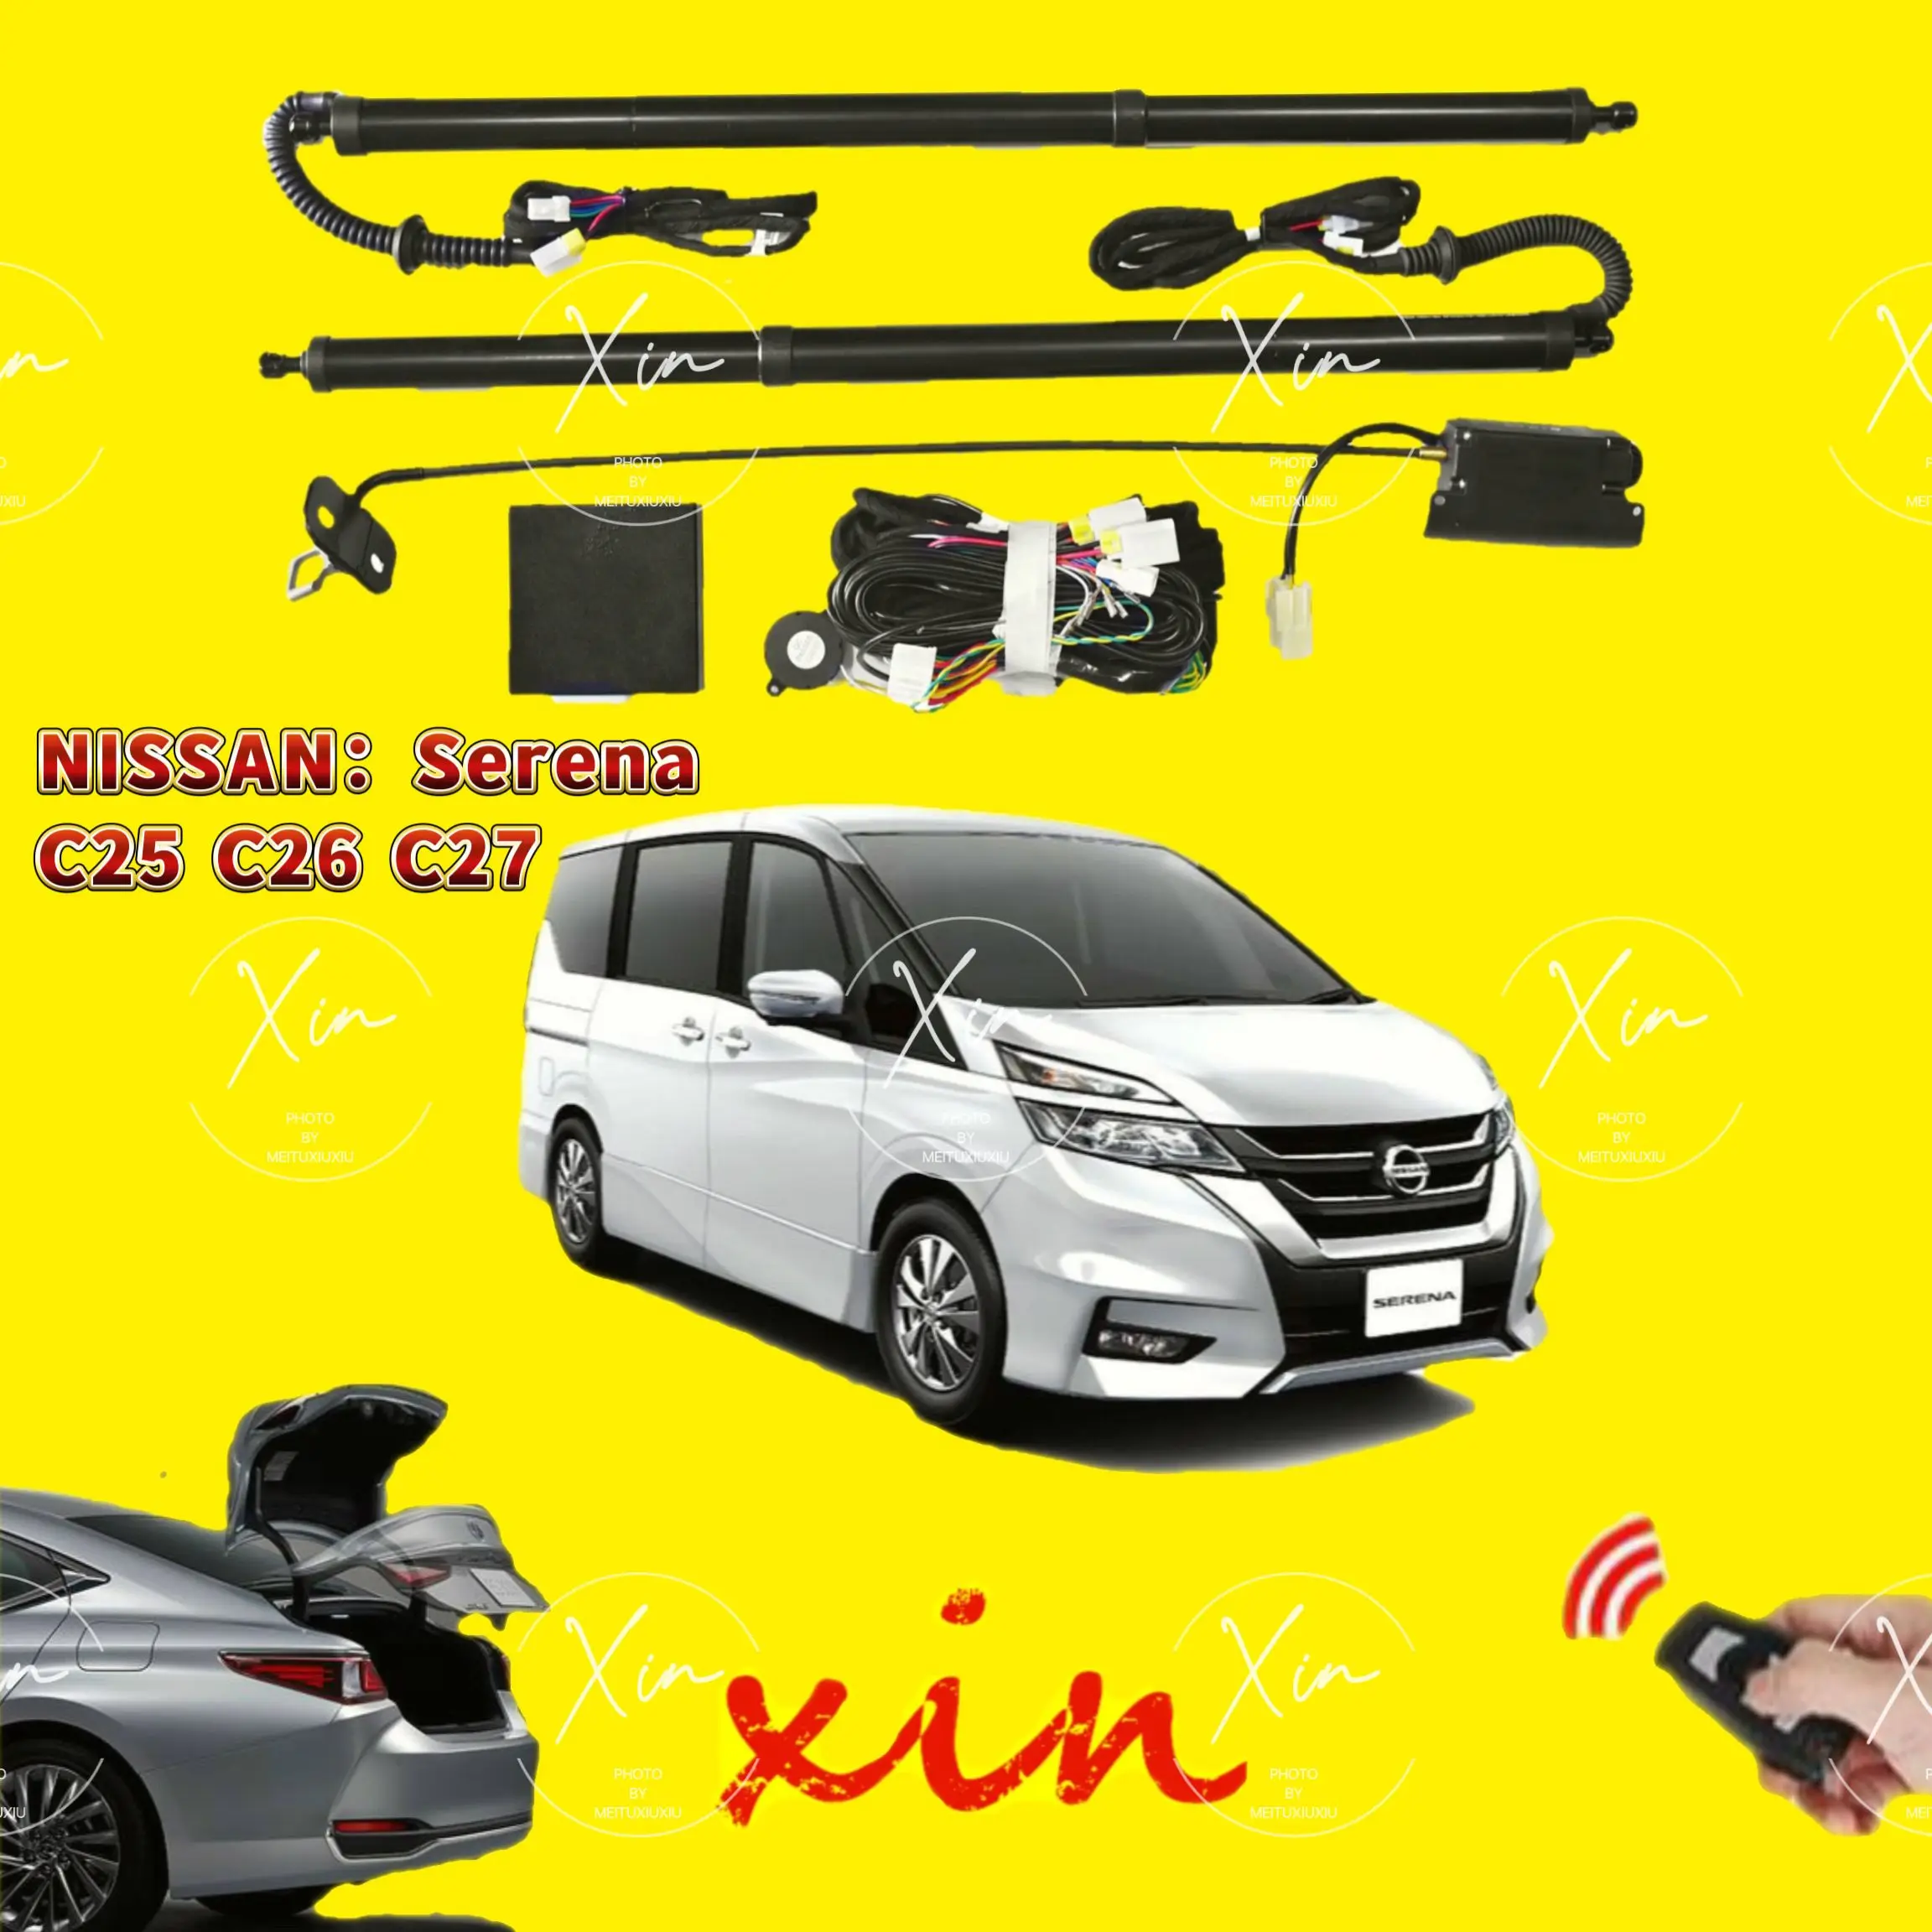 

For NISSAN Serena ontrol of the trunk electric tailgate car lift automatic opening drift drive power kit foot sensor